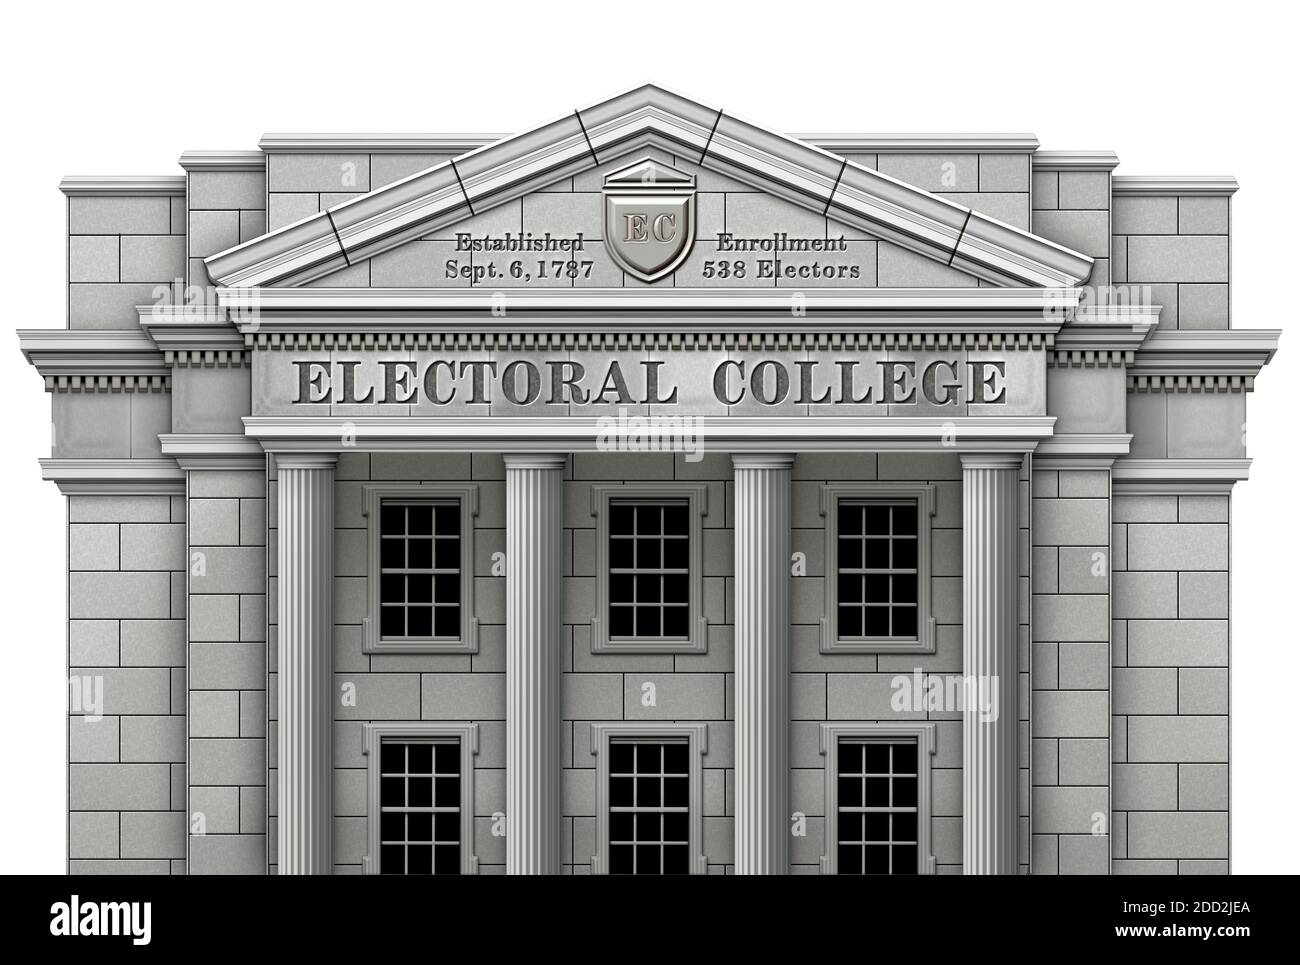 Electoral College system presented as a real physical college building. 3D and Photo Illustration Stock Photo